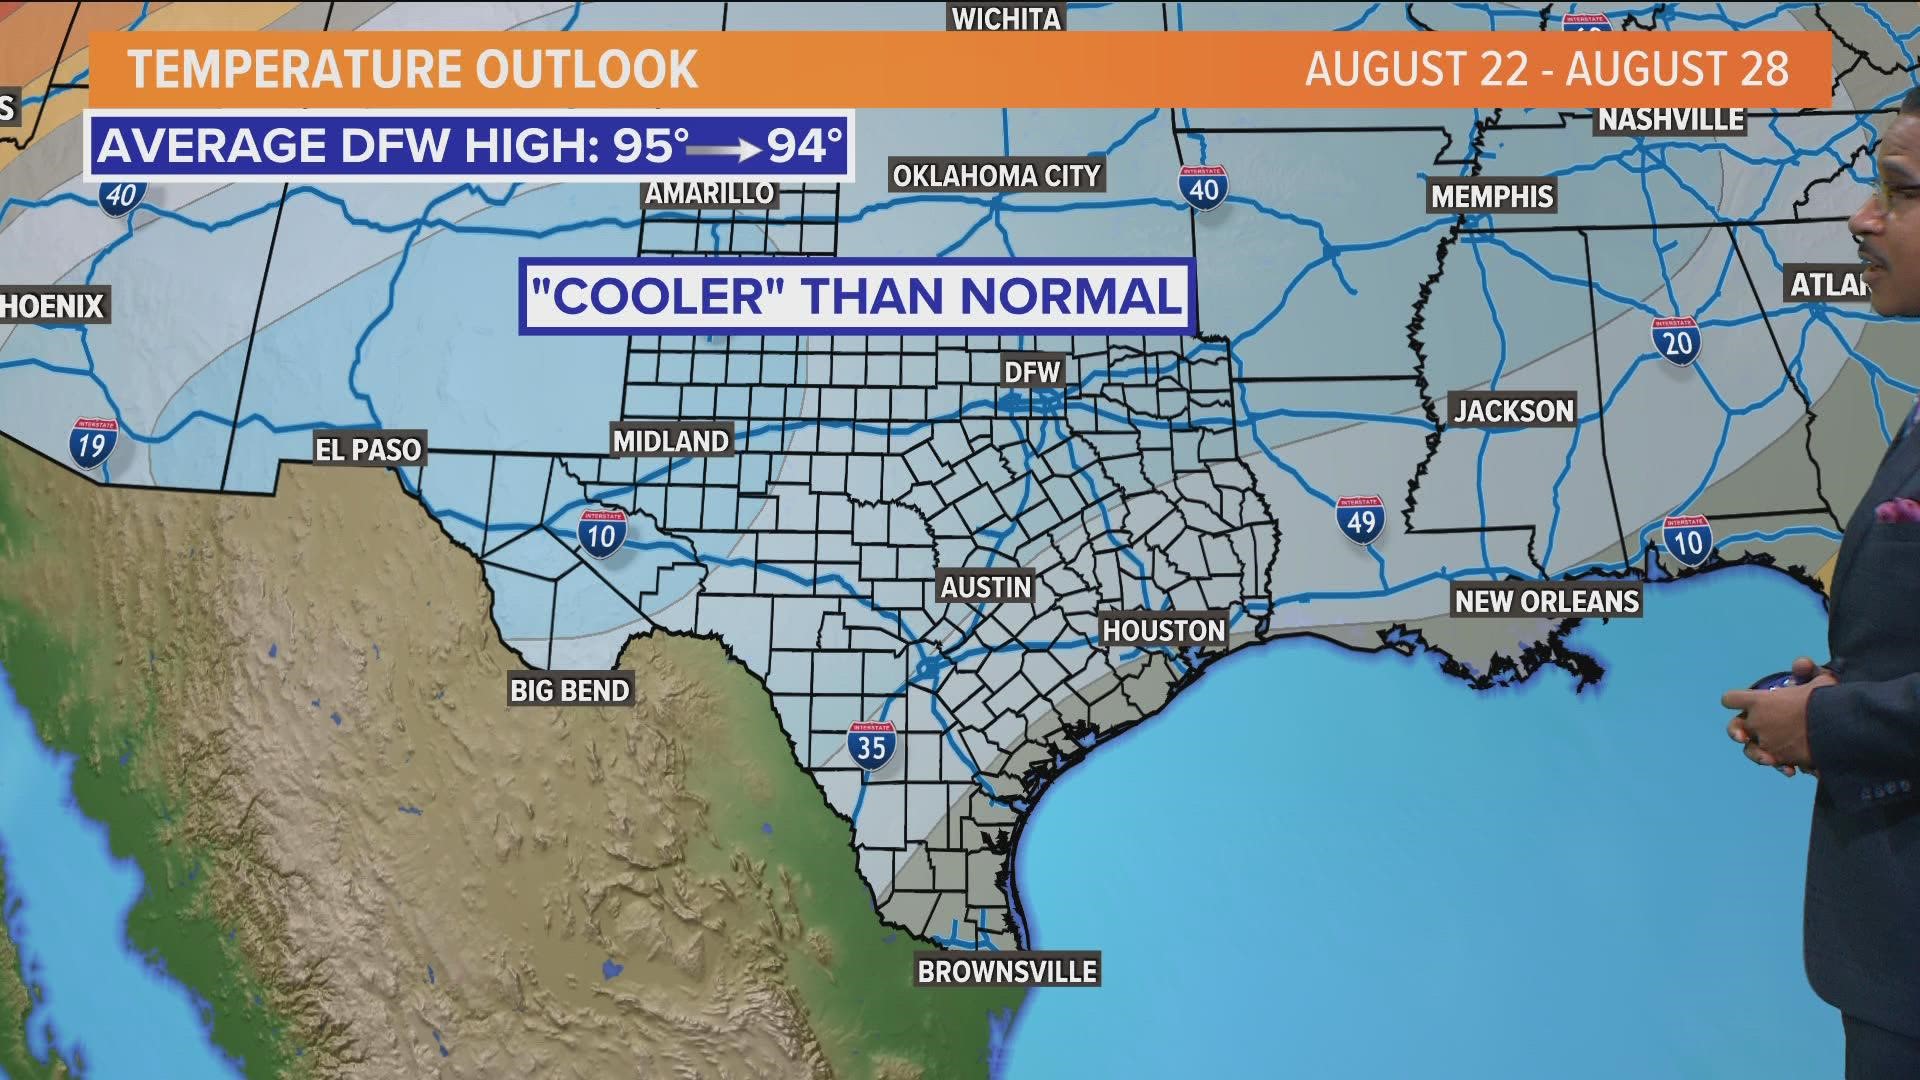 We're actually expecting cooler-than-normal temperatures for the latter half of August.